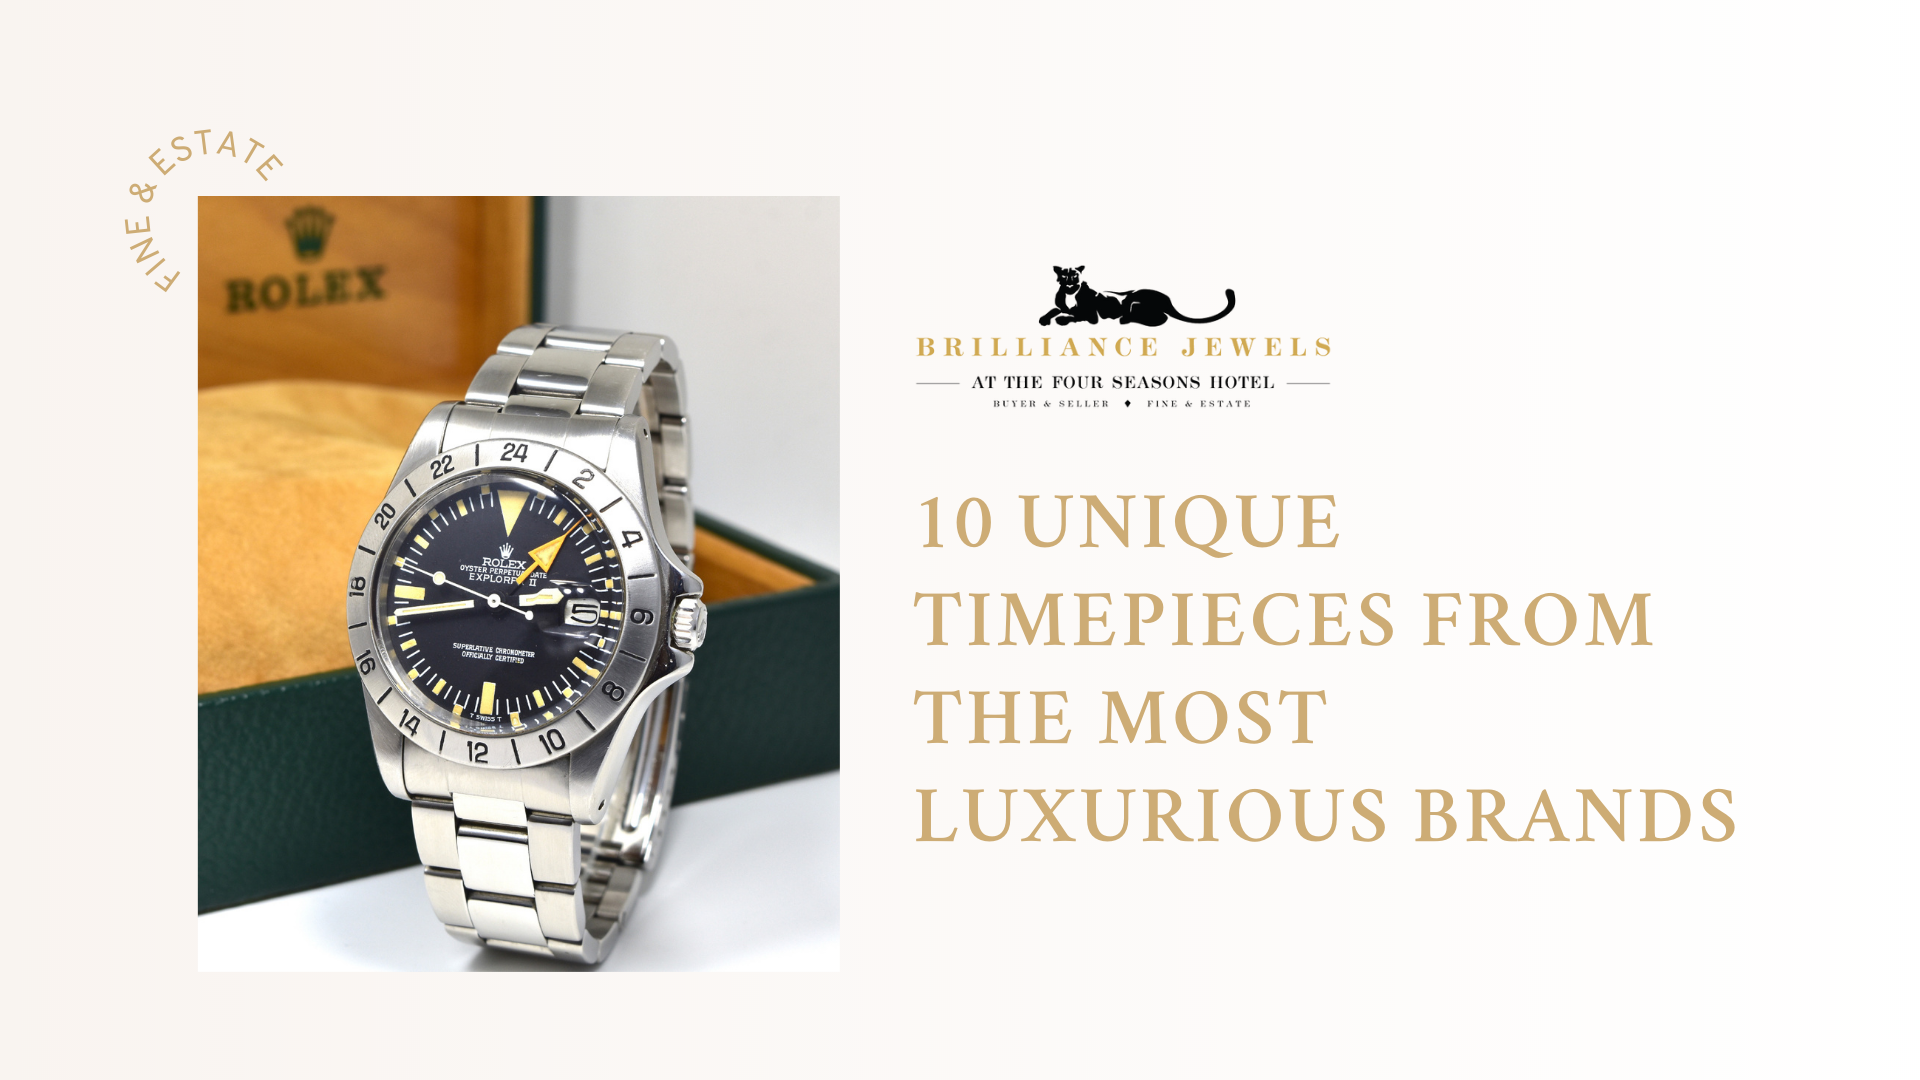 10 Unique Timepieces From the Most Luxurious Brands